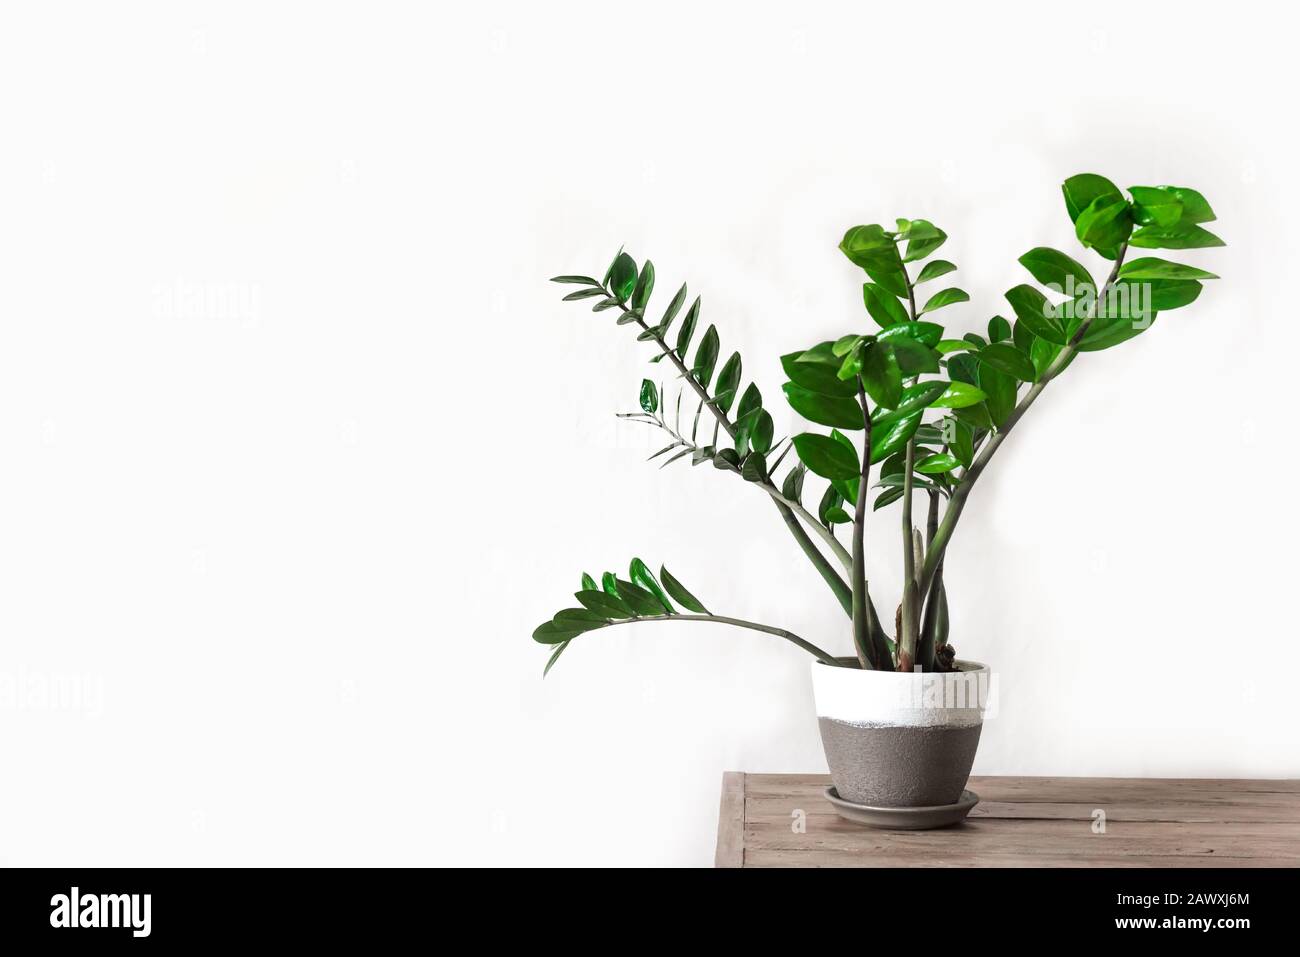 Zamiokulkas potted plant in ceramic pot. Urban jungle or home gardening concept with green plant, succulent, white wall, copy space. Greening home wit Stock Photo